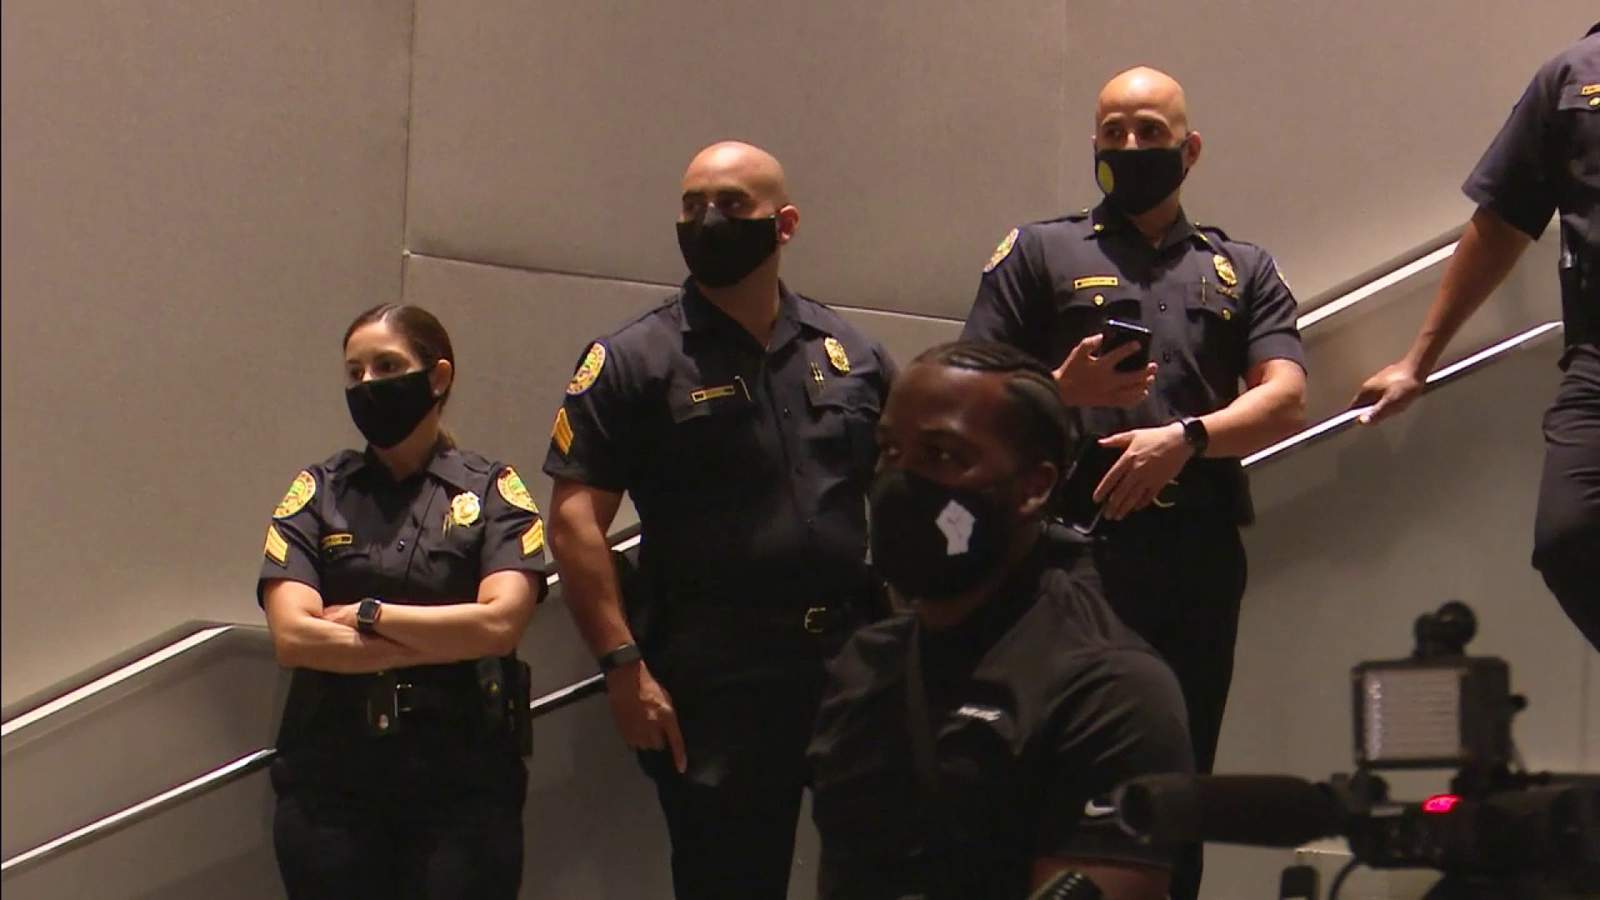 New Black Lives Matter initiative: Miami Heat teams up with MPD, D2C